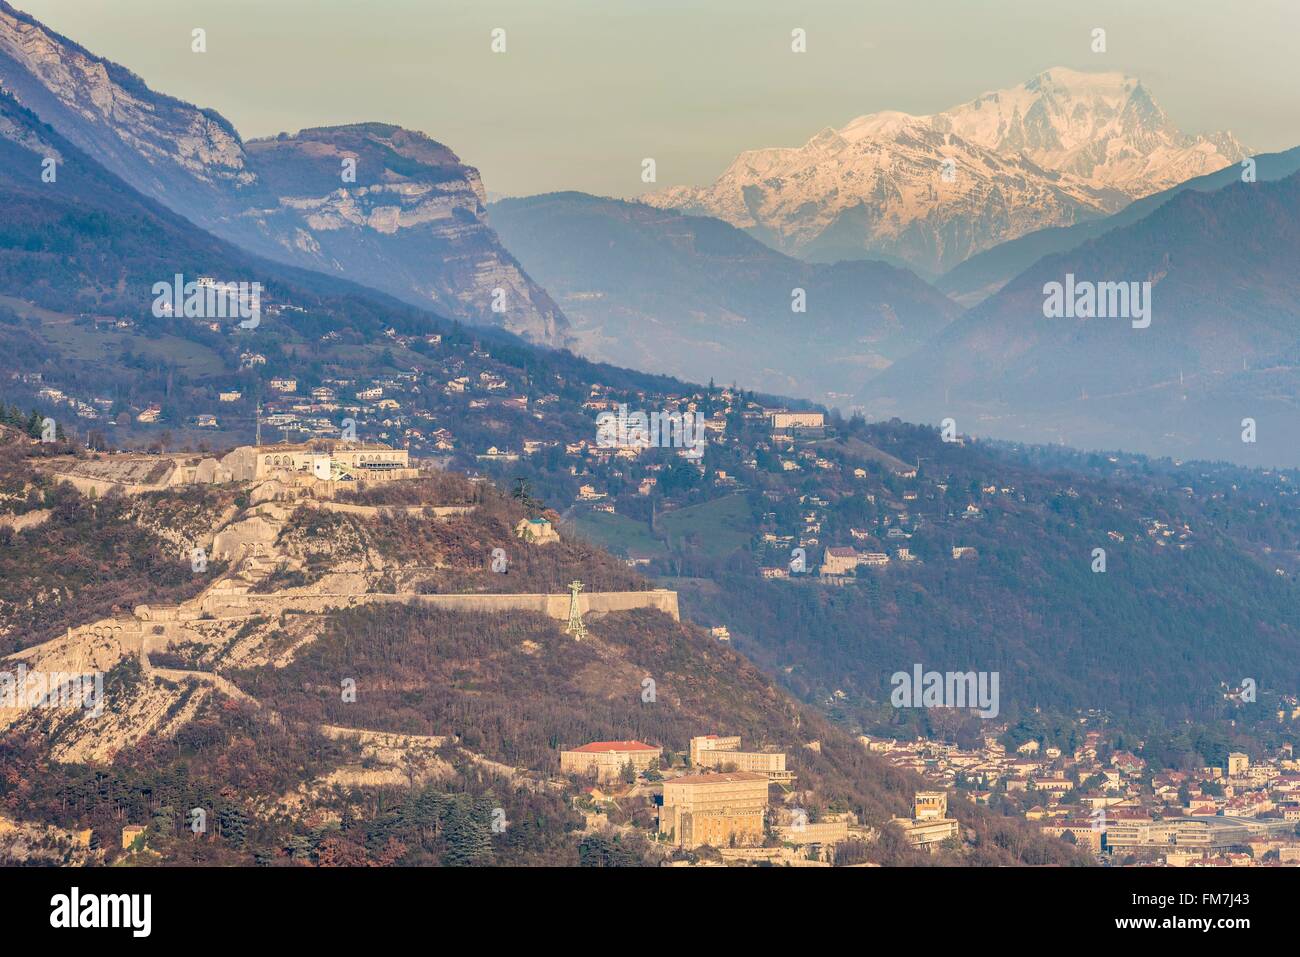 France, Isere, Grenoble, La Bastille Fort (19th century) on the foothills of the Chartreuse massif and overlooking the city of Grenoble, Mont-Blanc massif (alt : 4809 m) in the background Stock Photo